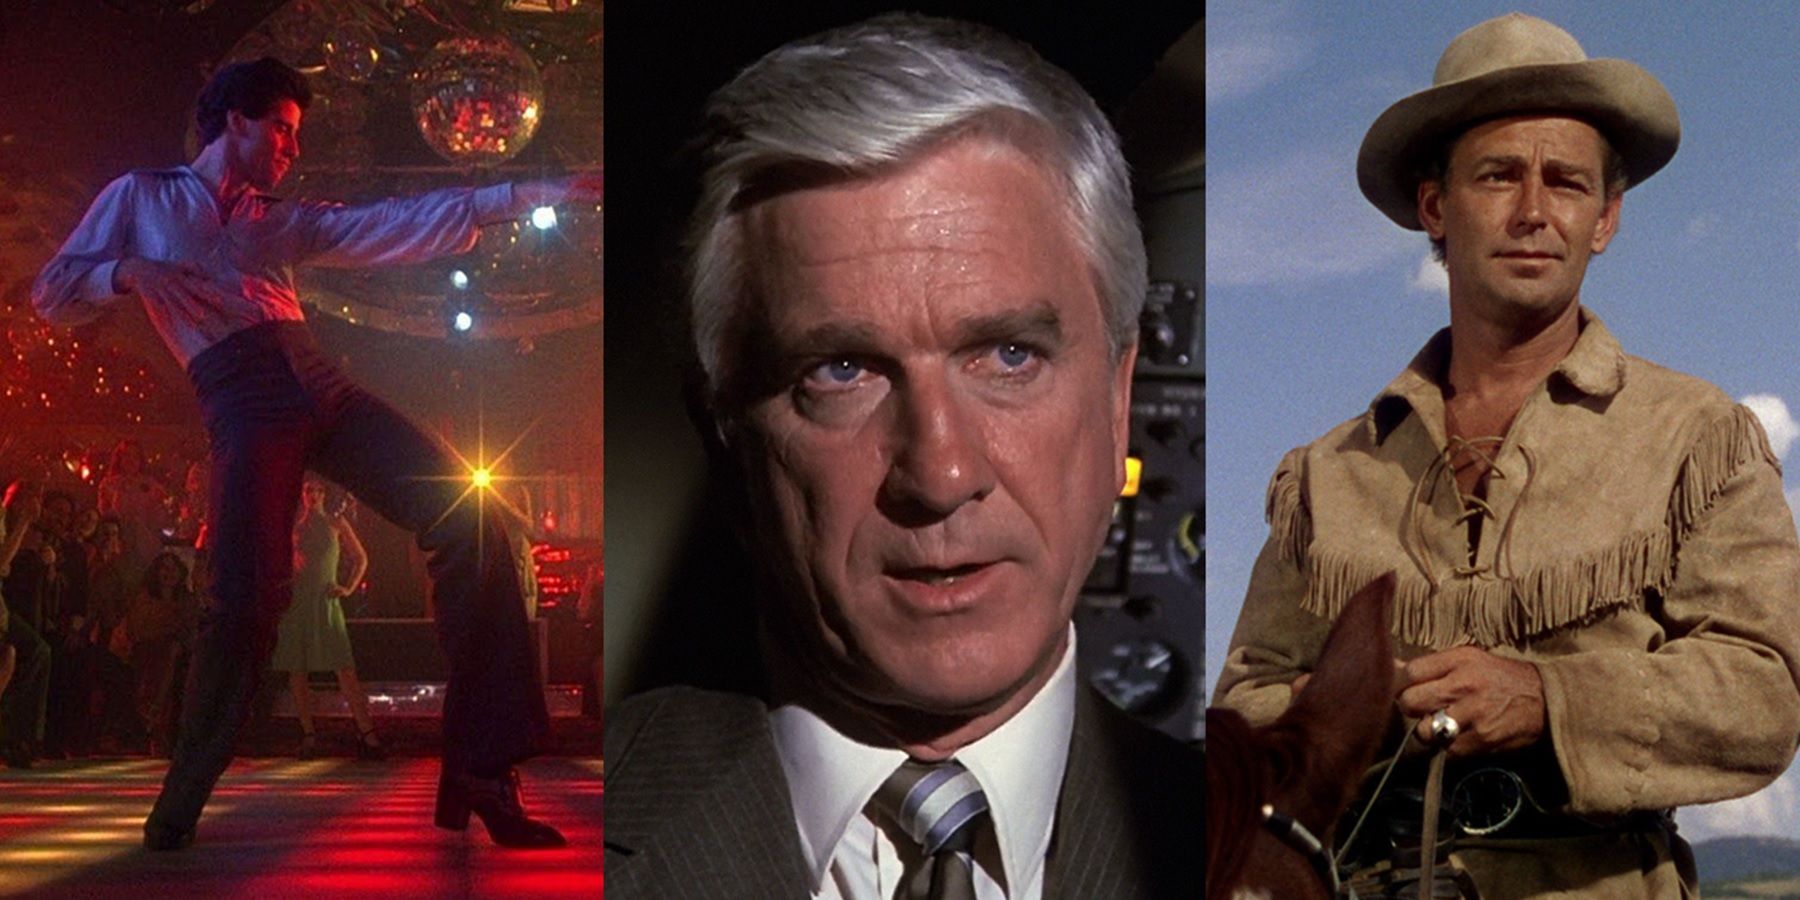 John Travolta in Saturday Night Fever, Leslie Nielsen in Airplane, and Alan Ladd in Shane